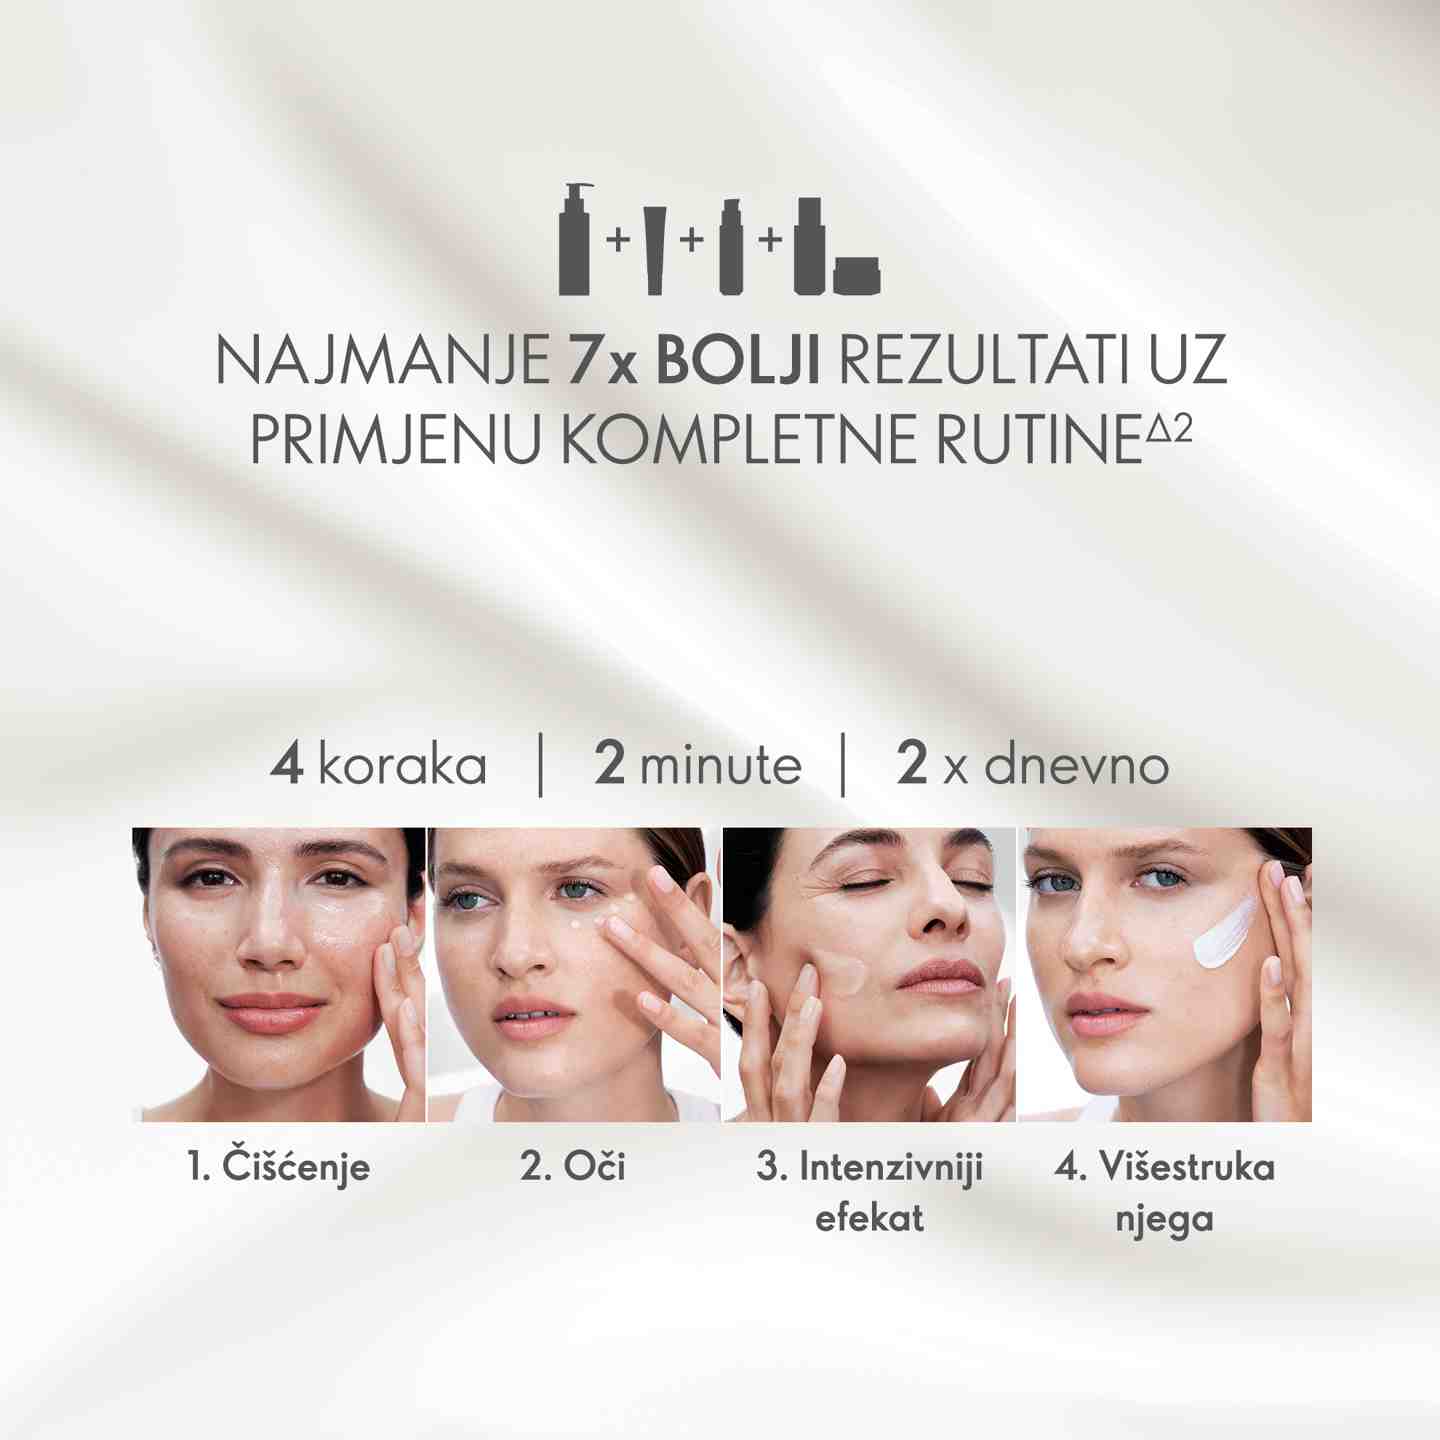 https://media-cdn.oriflame.com/productImage?externalMediaId=product-management-media%2fProducts%2f45595%2fBA%2f45595_5.png&id=17590769&version=2